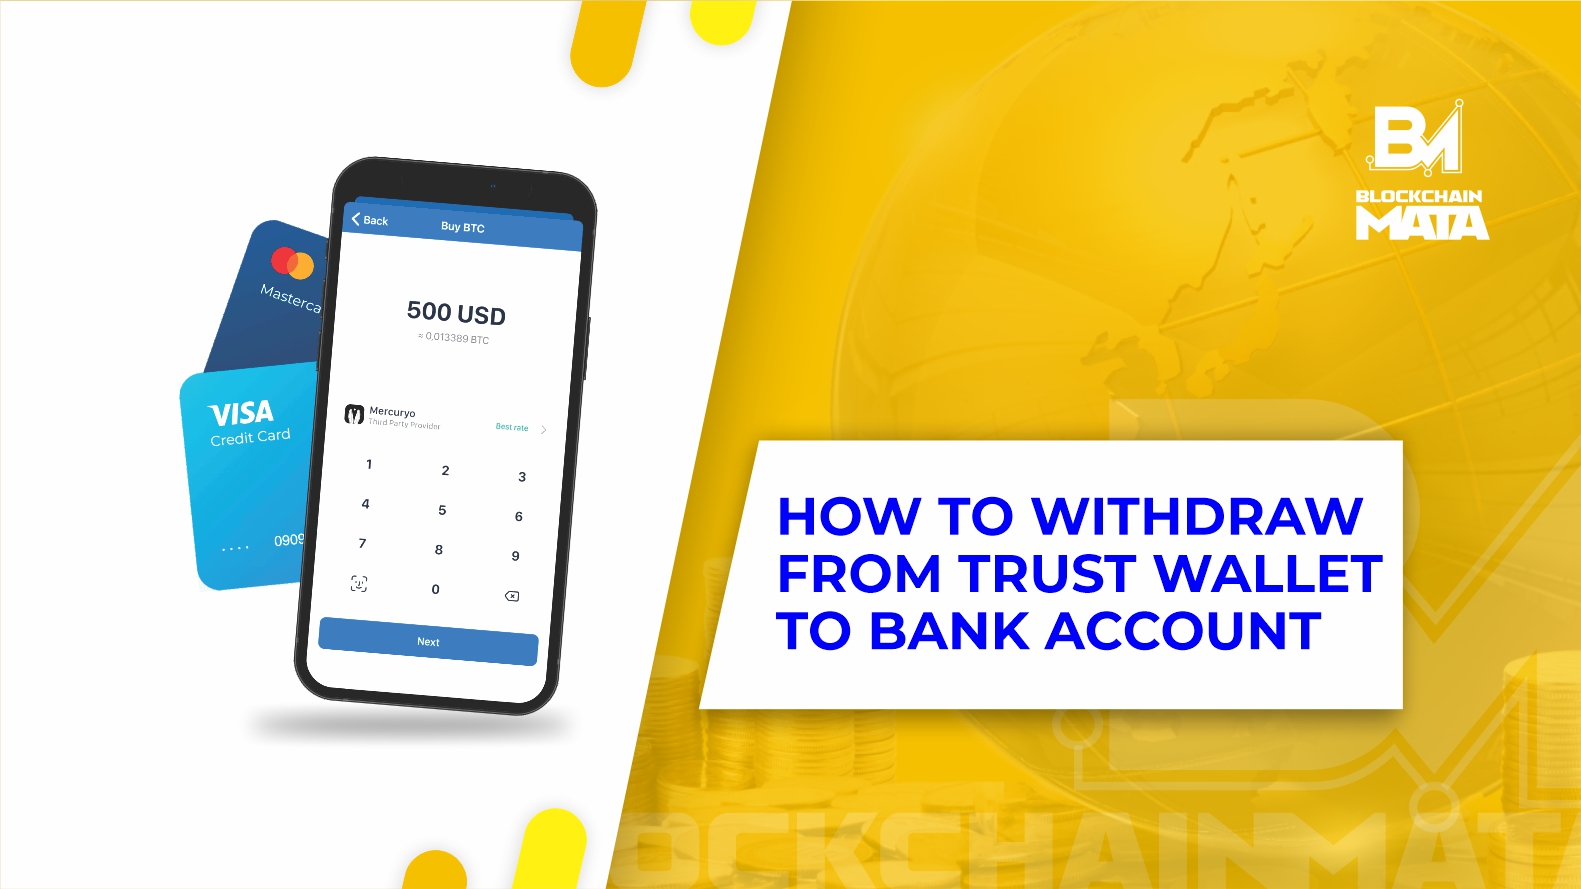 How to Withdraw from Trust wallet to Bank Account